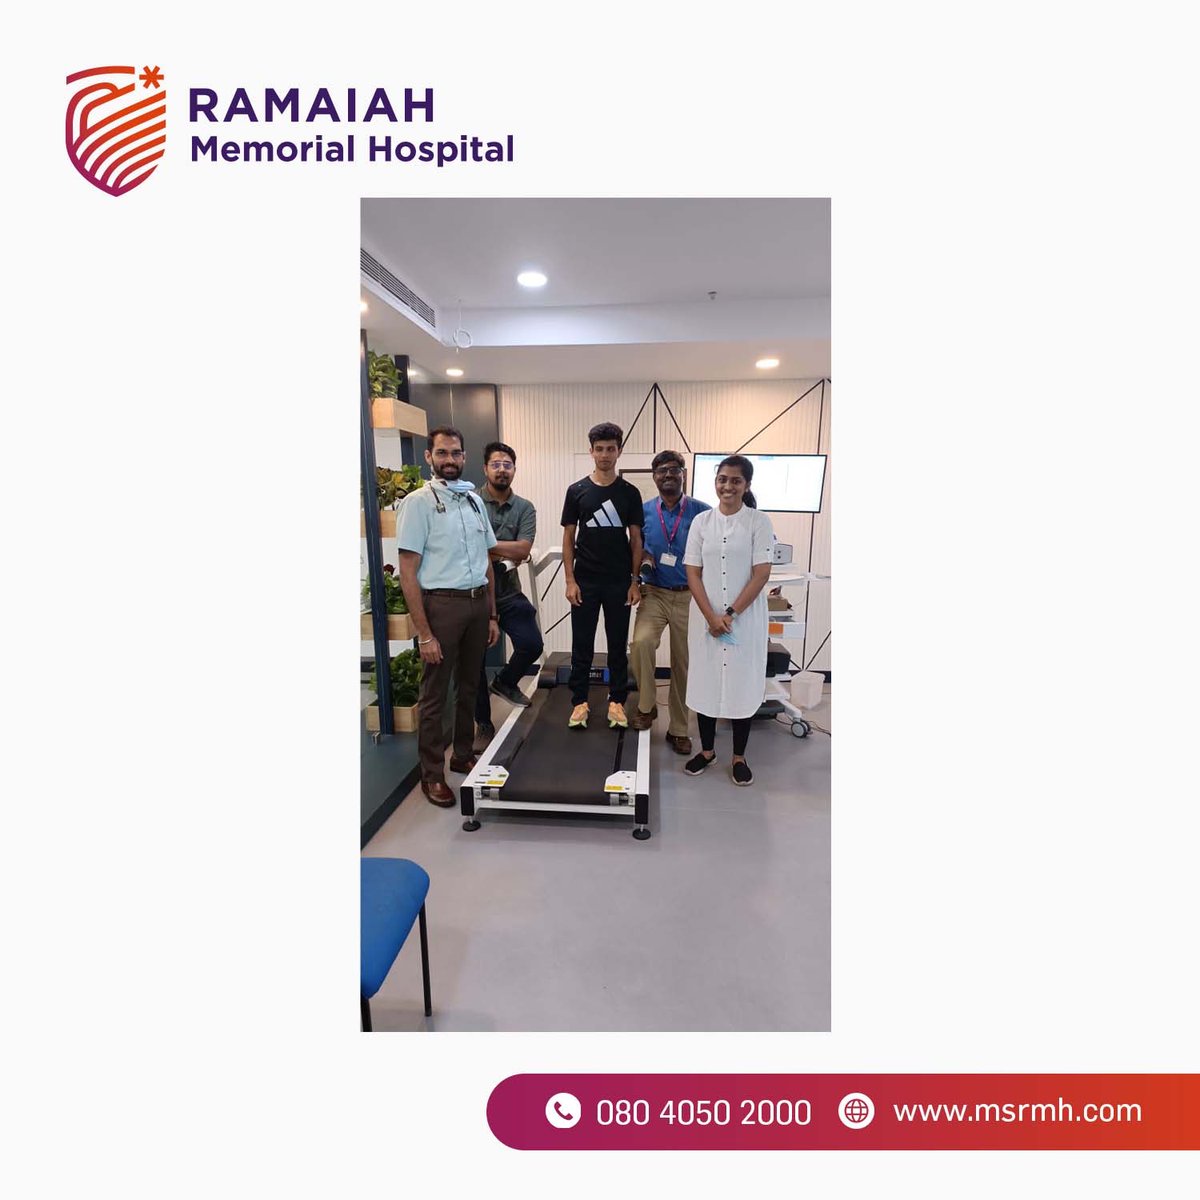 Mr. Sharath Kumar, 1500 Mts. blind (T-12 category) elite #ParaAthlete, was tested for his Vo2 max levels at the Human Performance Lab, Ramaiah Memorial Hospital. 
We wish the athlete the best for the upcoming trials & para-Asian games to follow later this year.